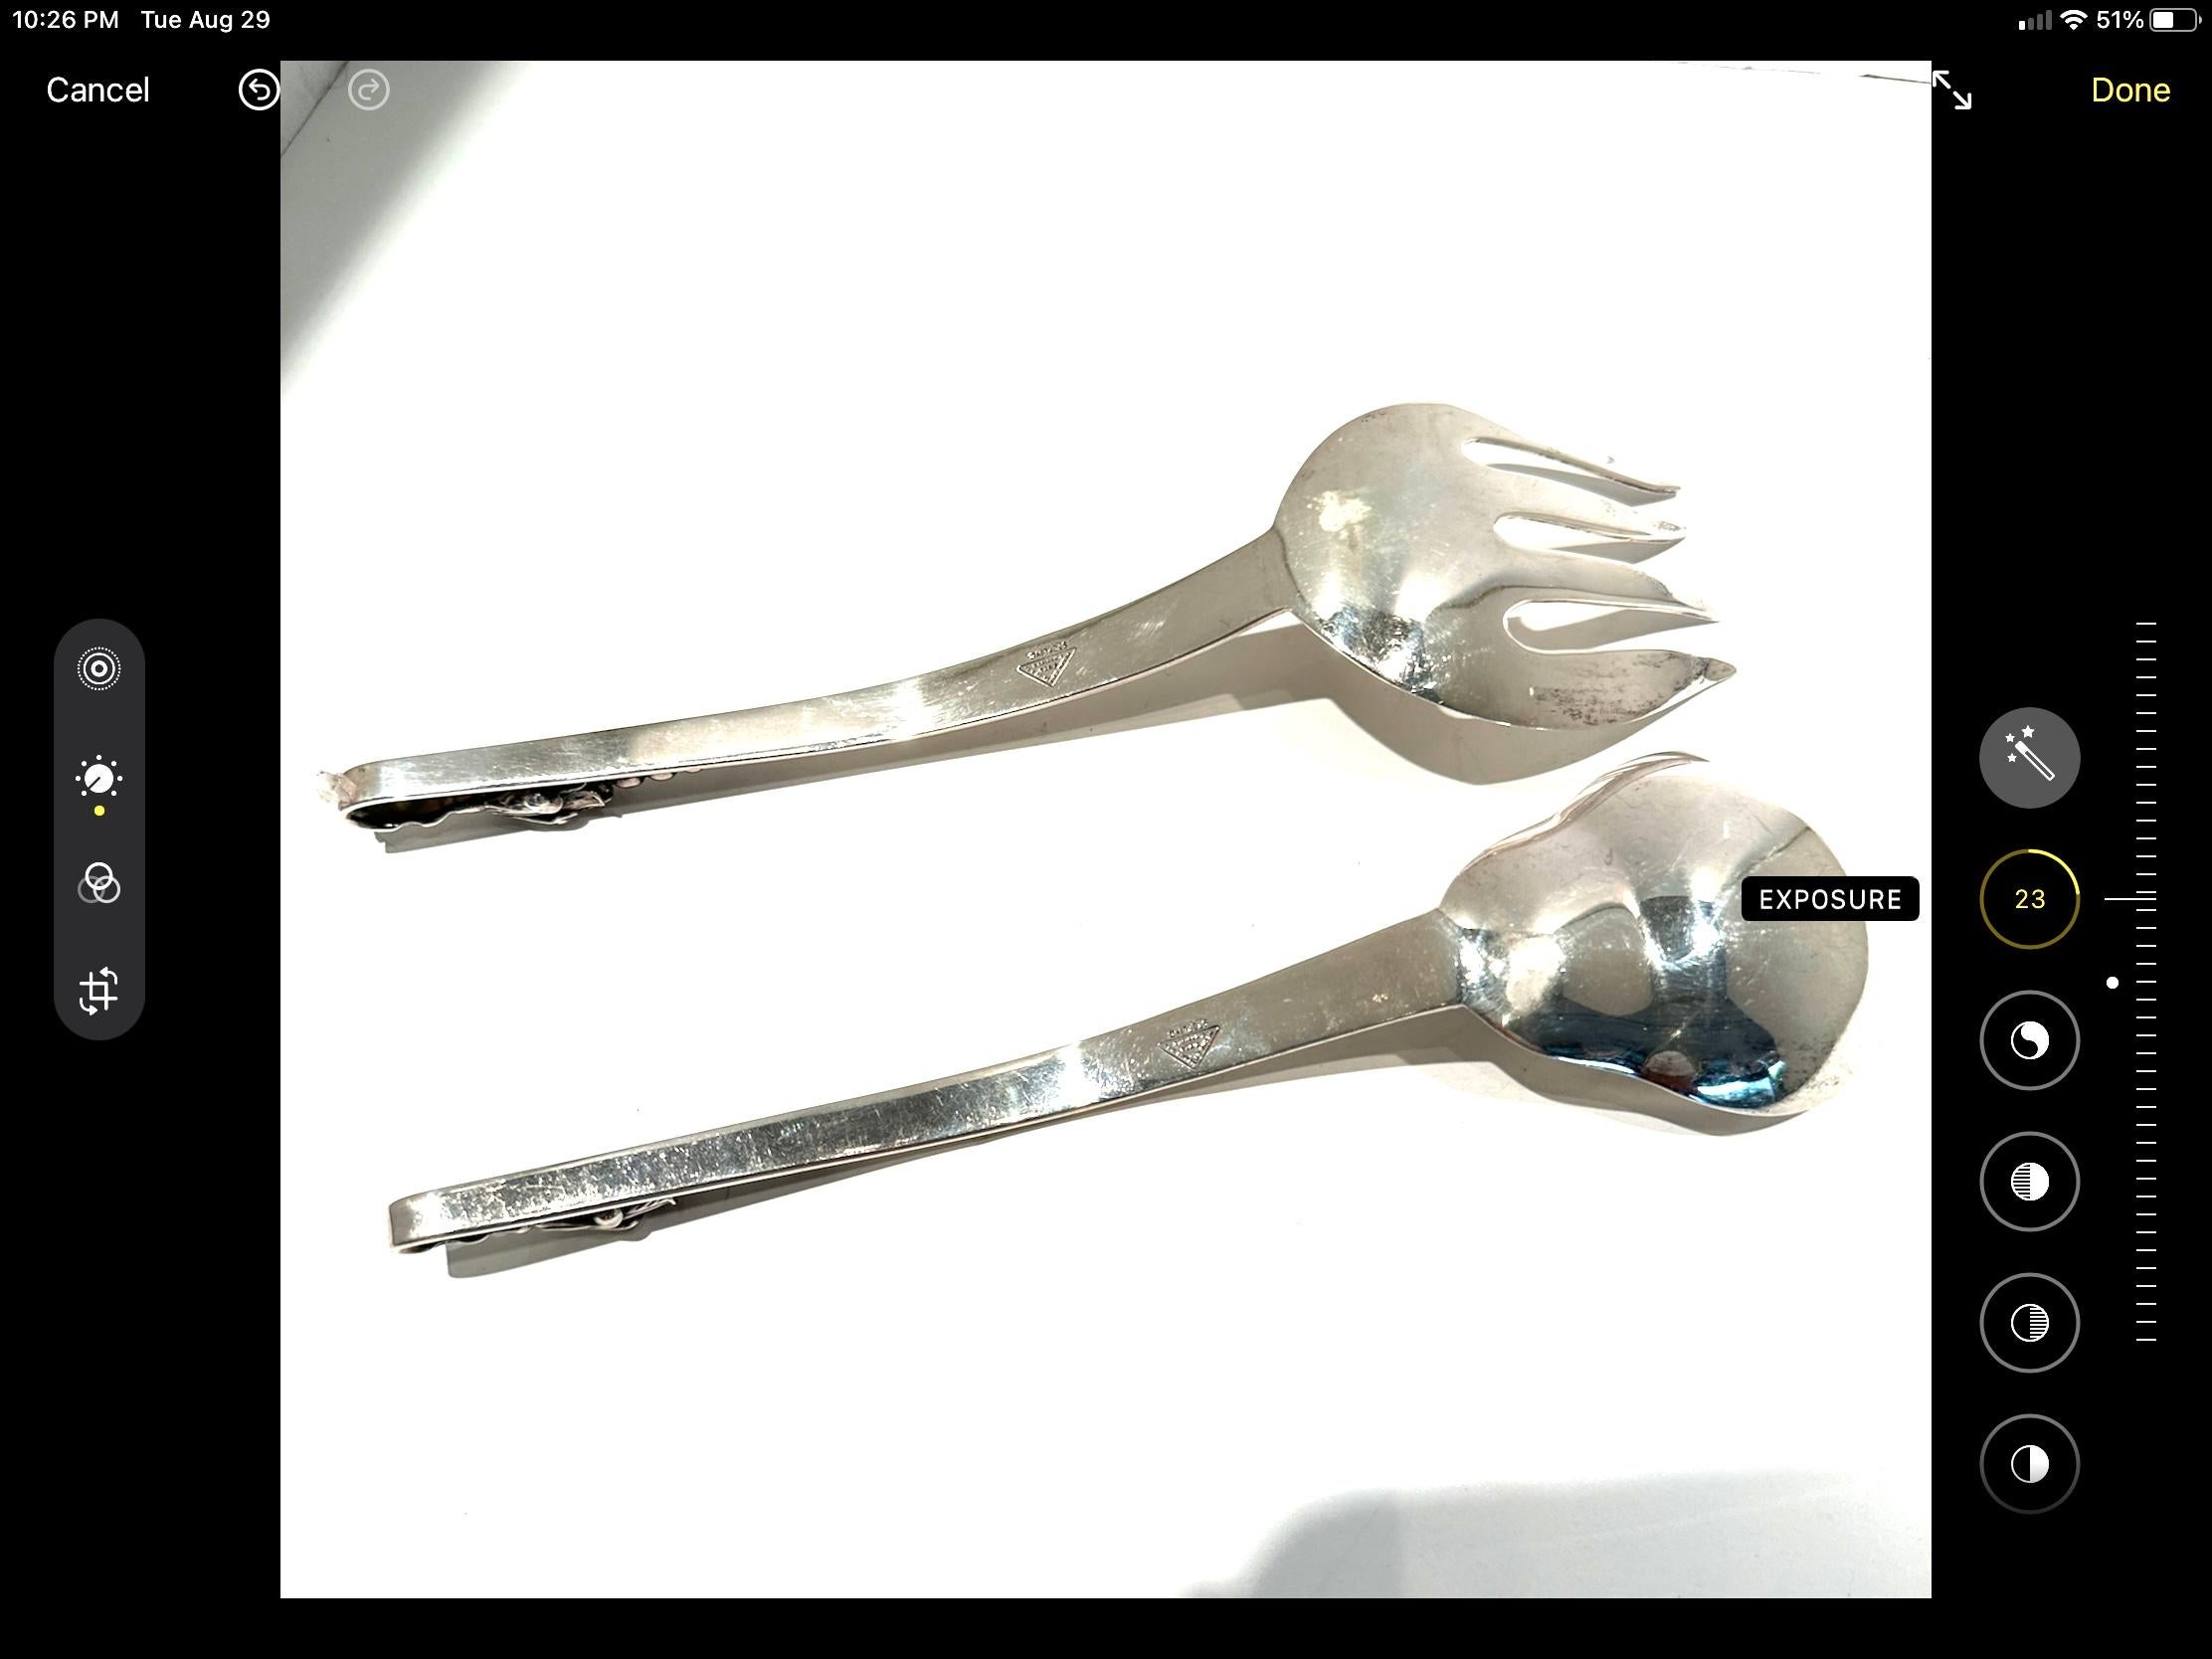 Pair of lovely pair of sterling silver Spoon and Fork for serving.  
Decorative handles looped ends with blossom and berries.
Used excellent condition.